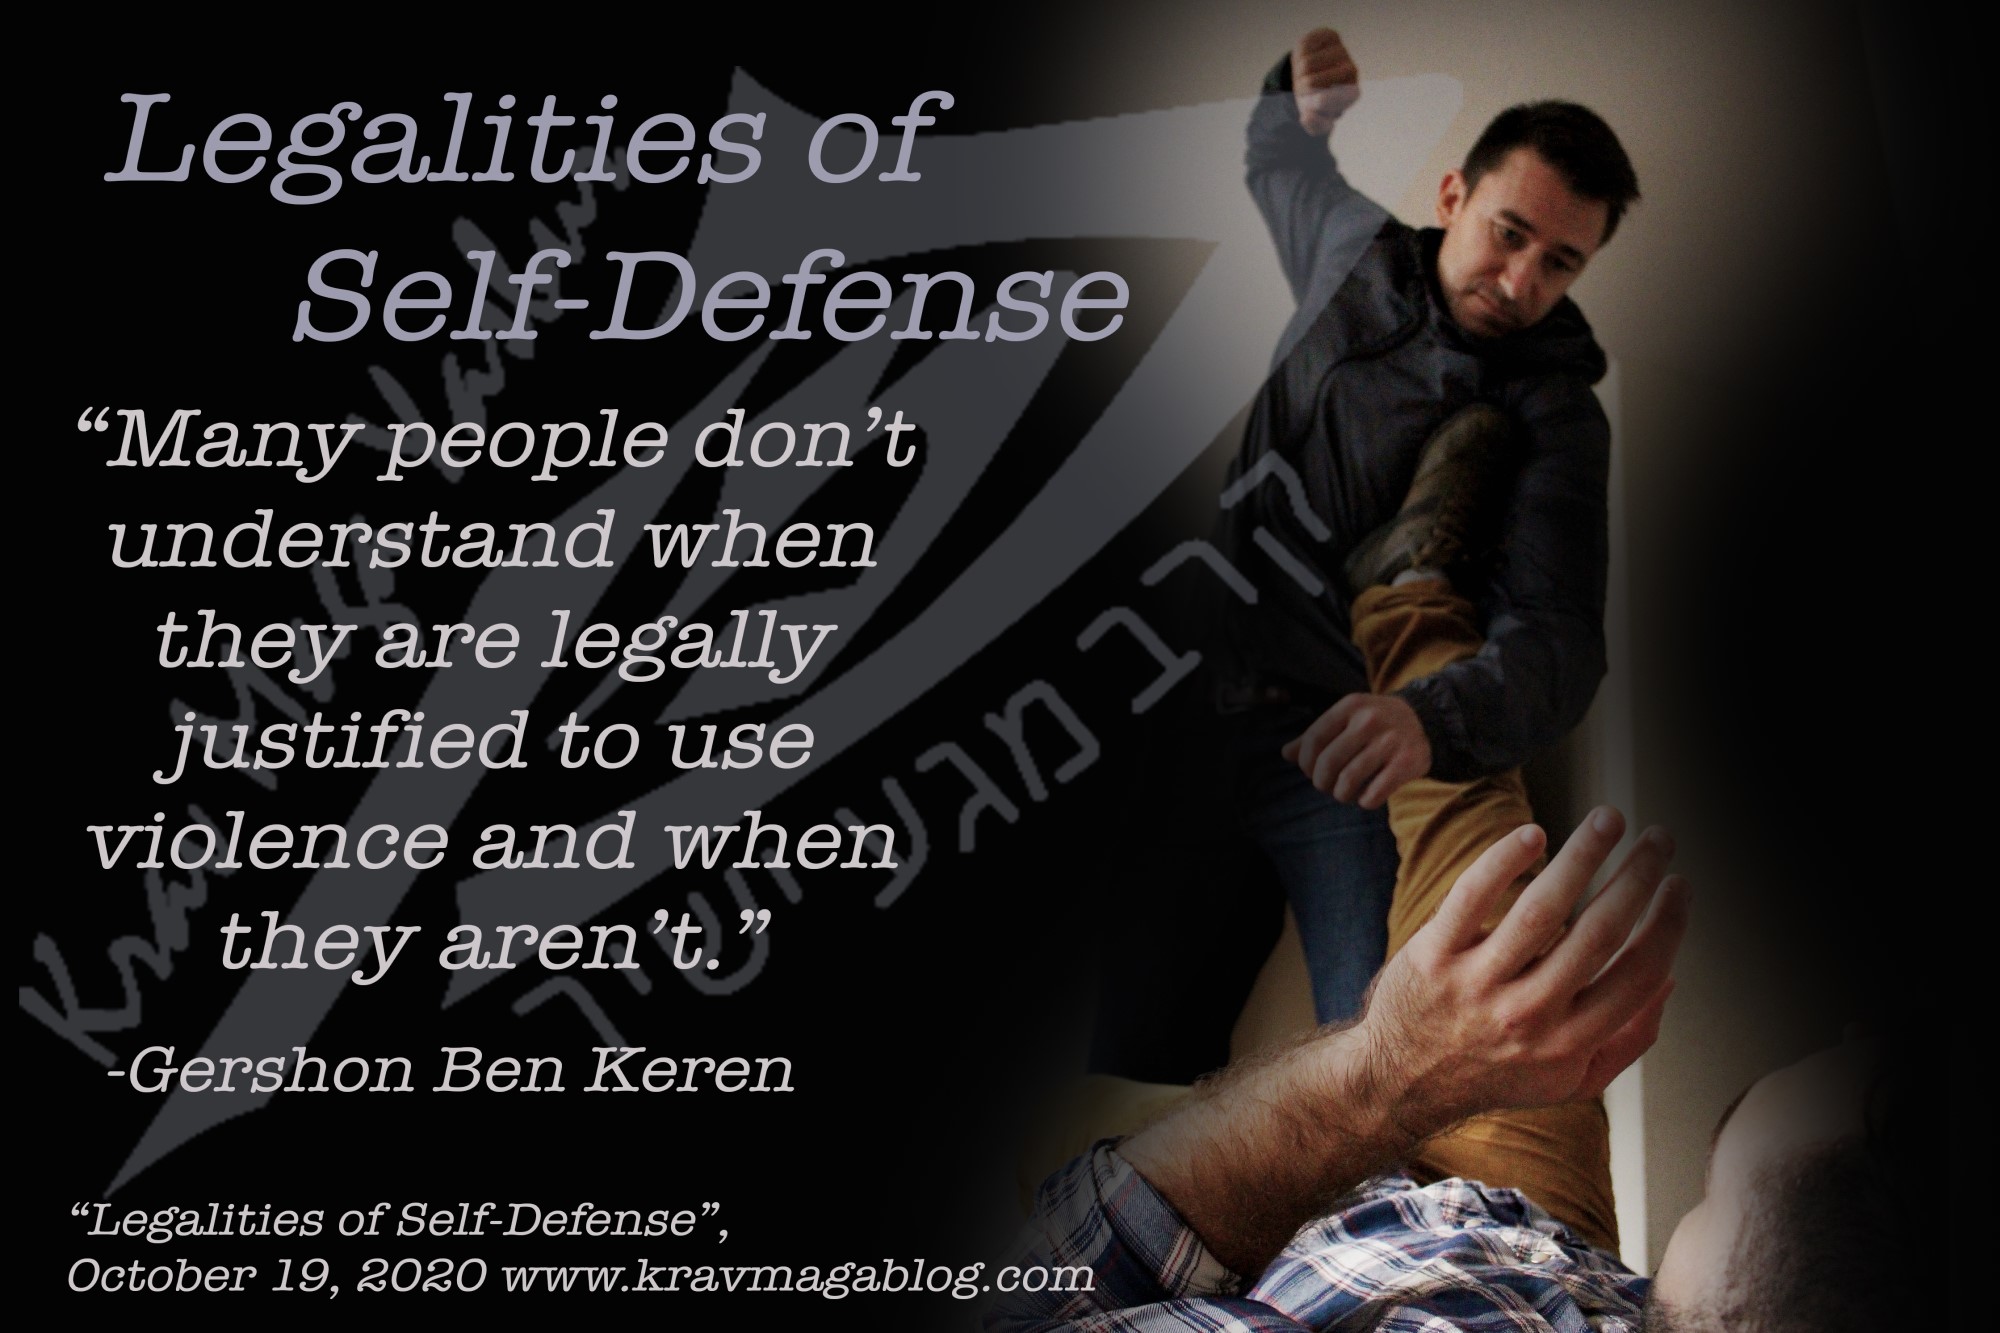 Blog About Legalities of Self-Defense